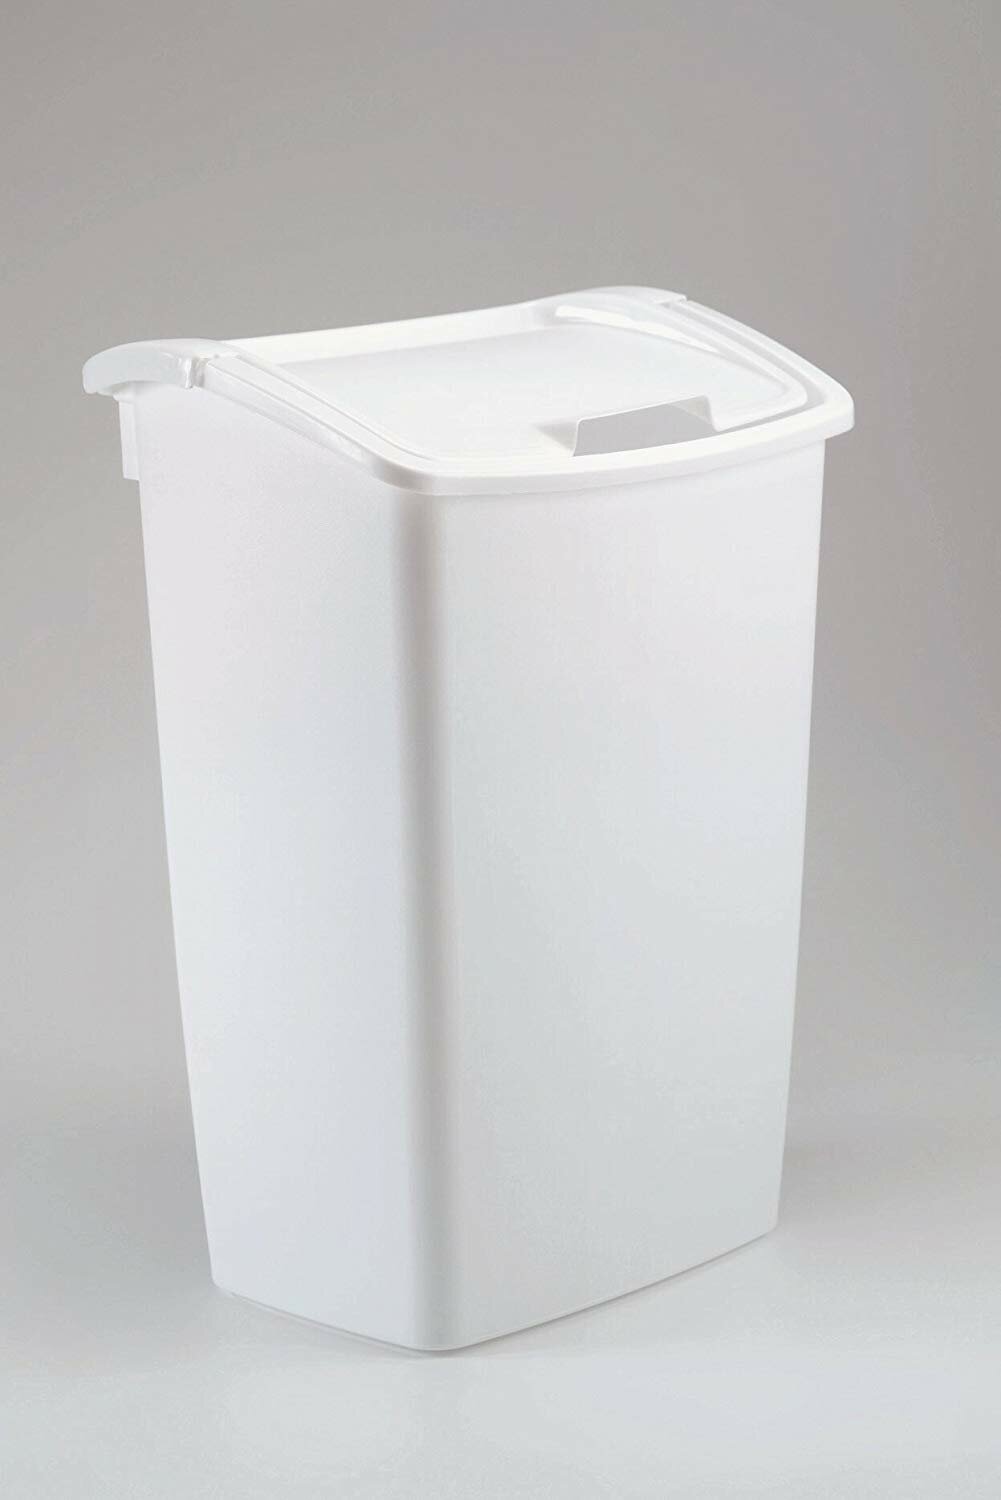 Rubbermaid Commercial Products Rubbermaid 13.25 Gallon Rectangular